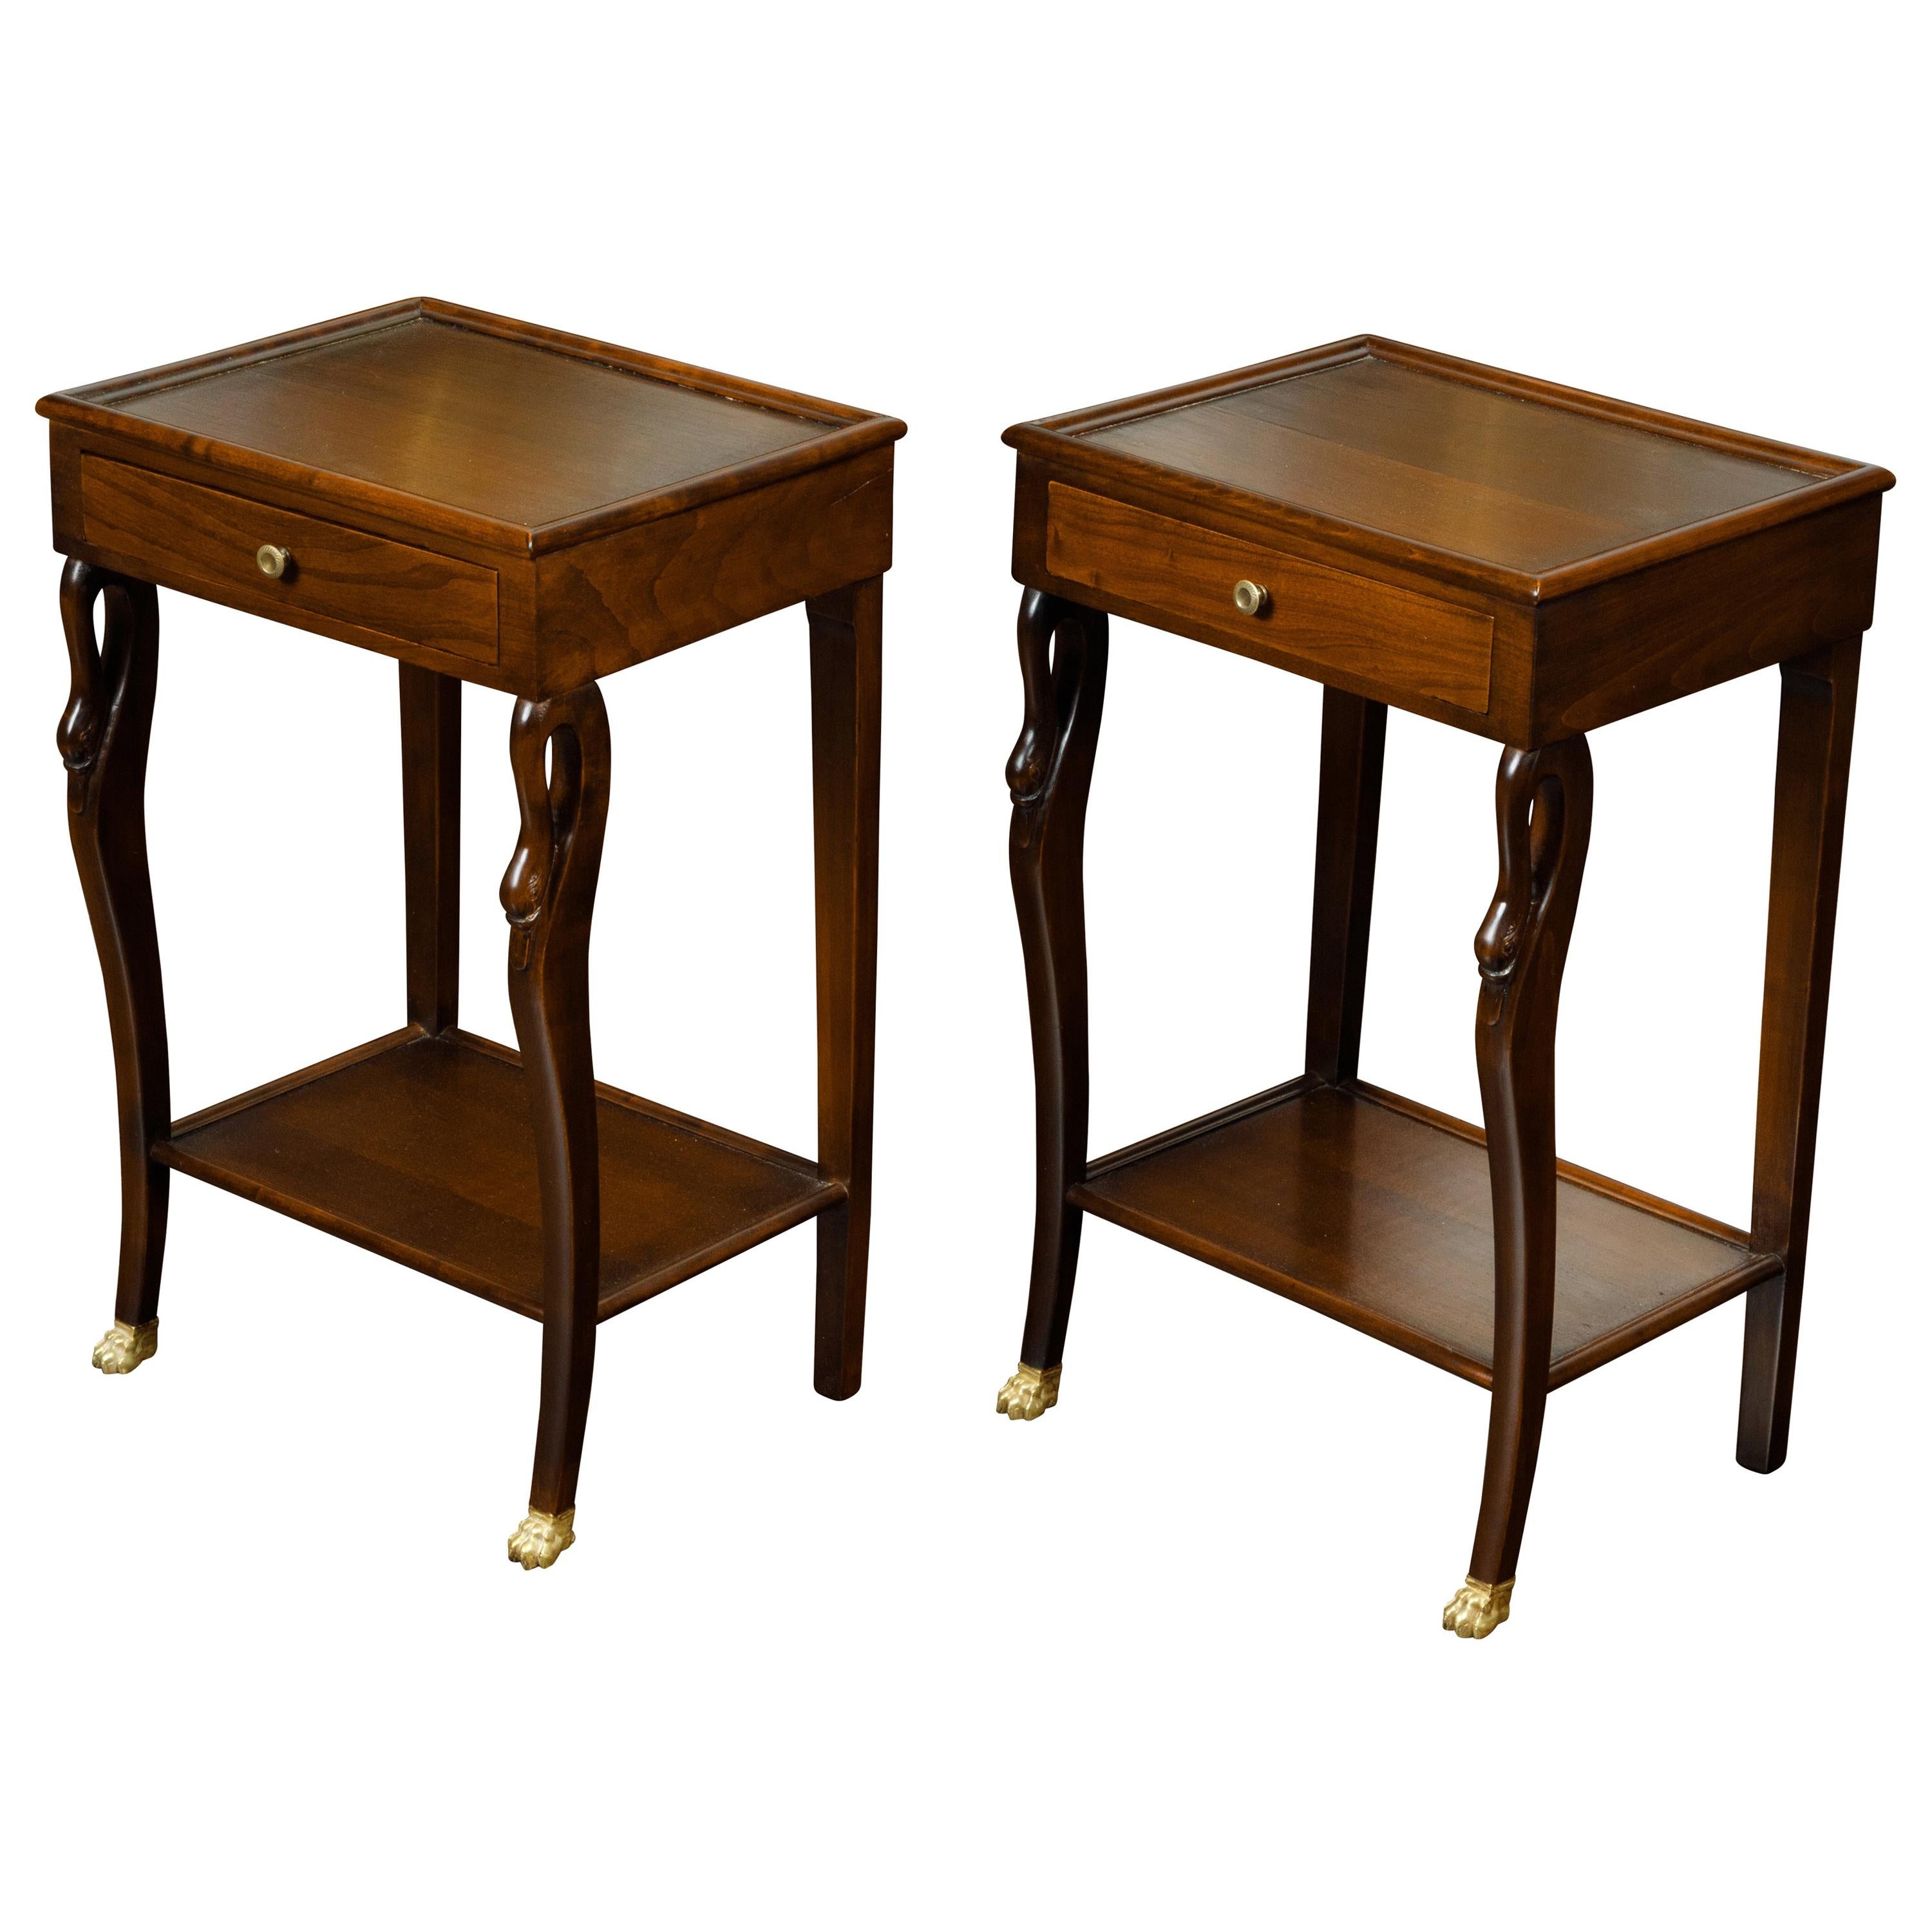 Pair of Vintage French Empire Style Mahogany Bedside Tables with Swan Motifs